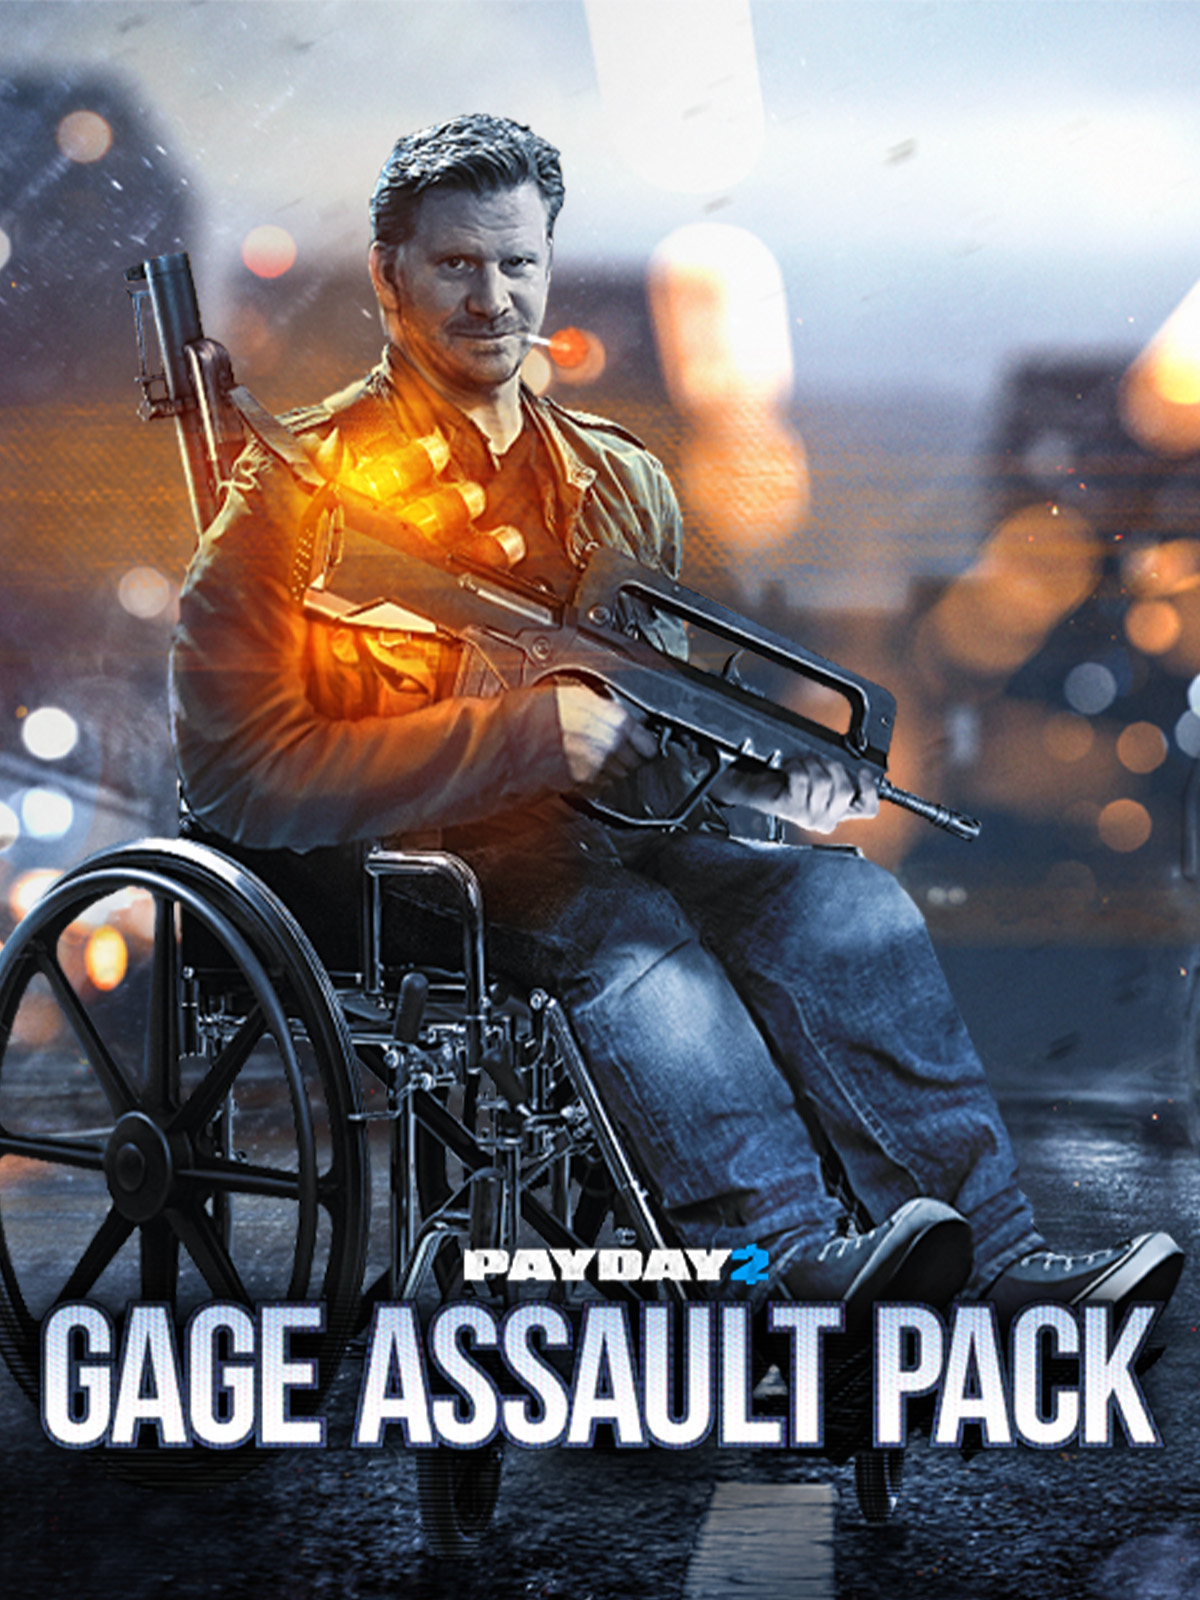 Gage assault payday 2